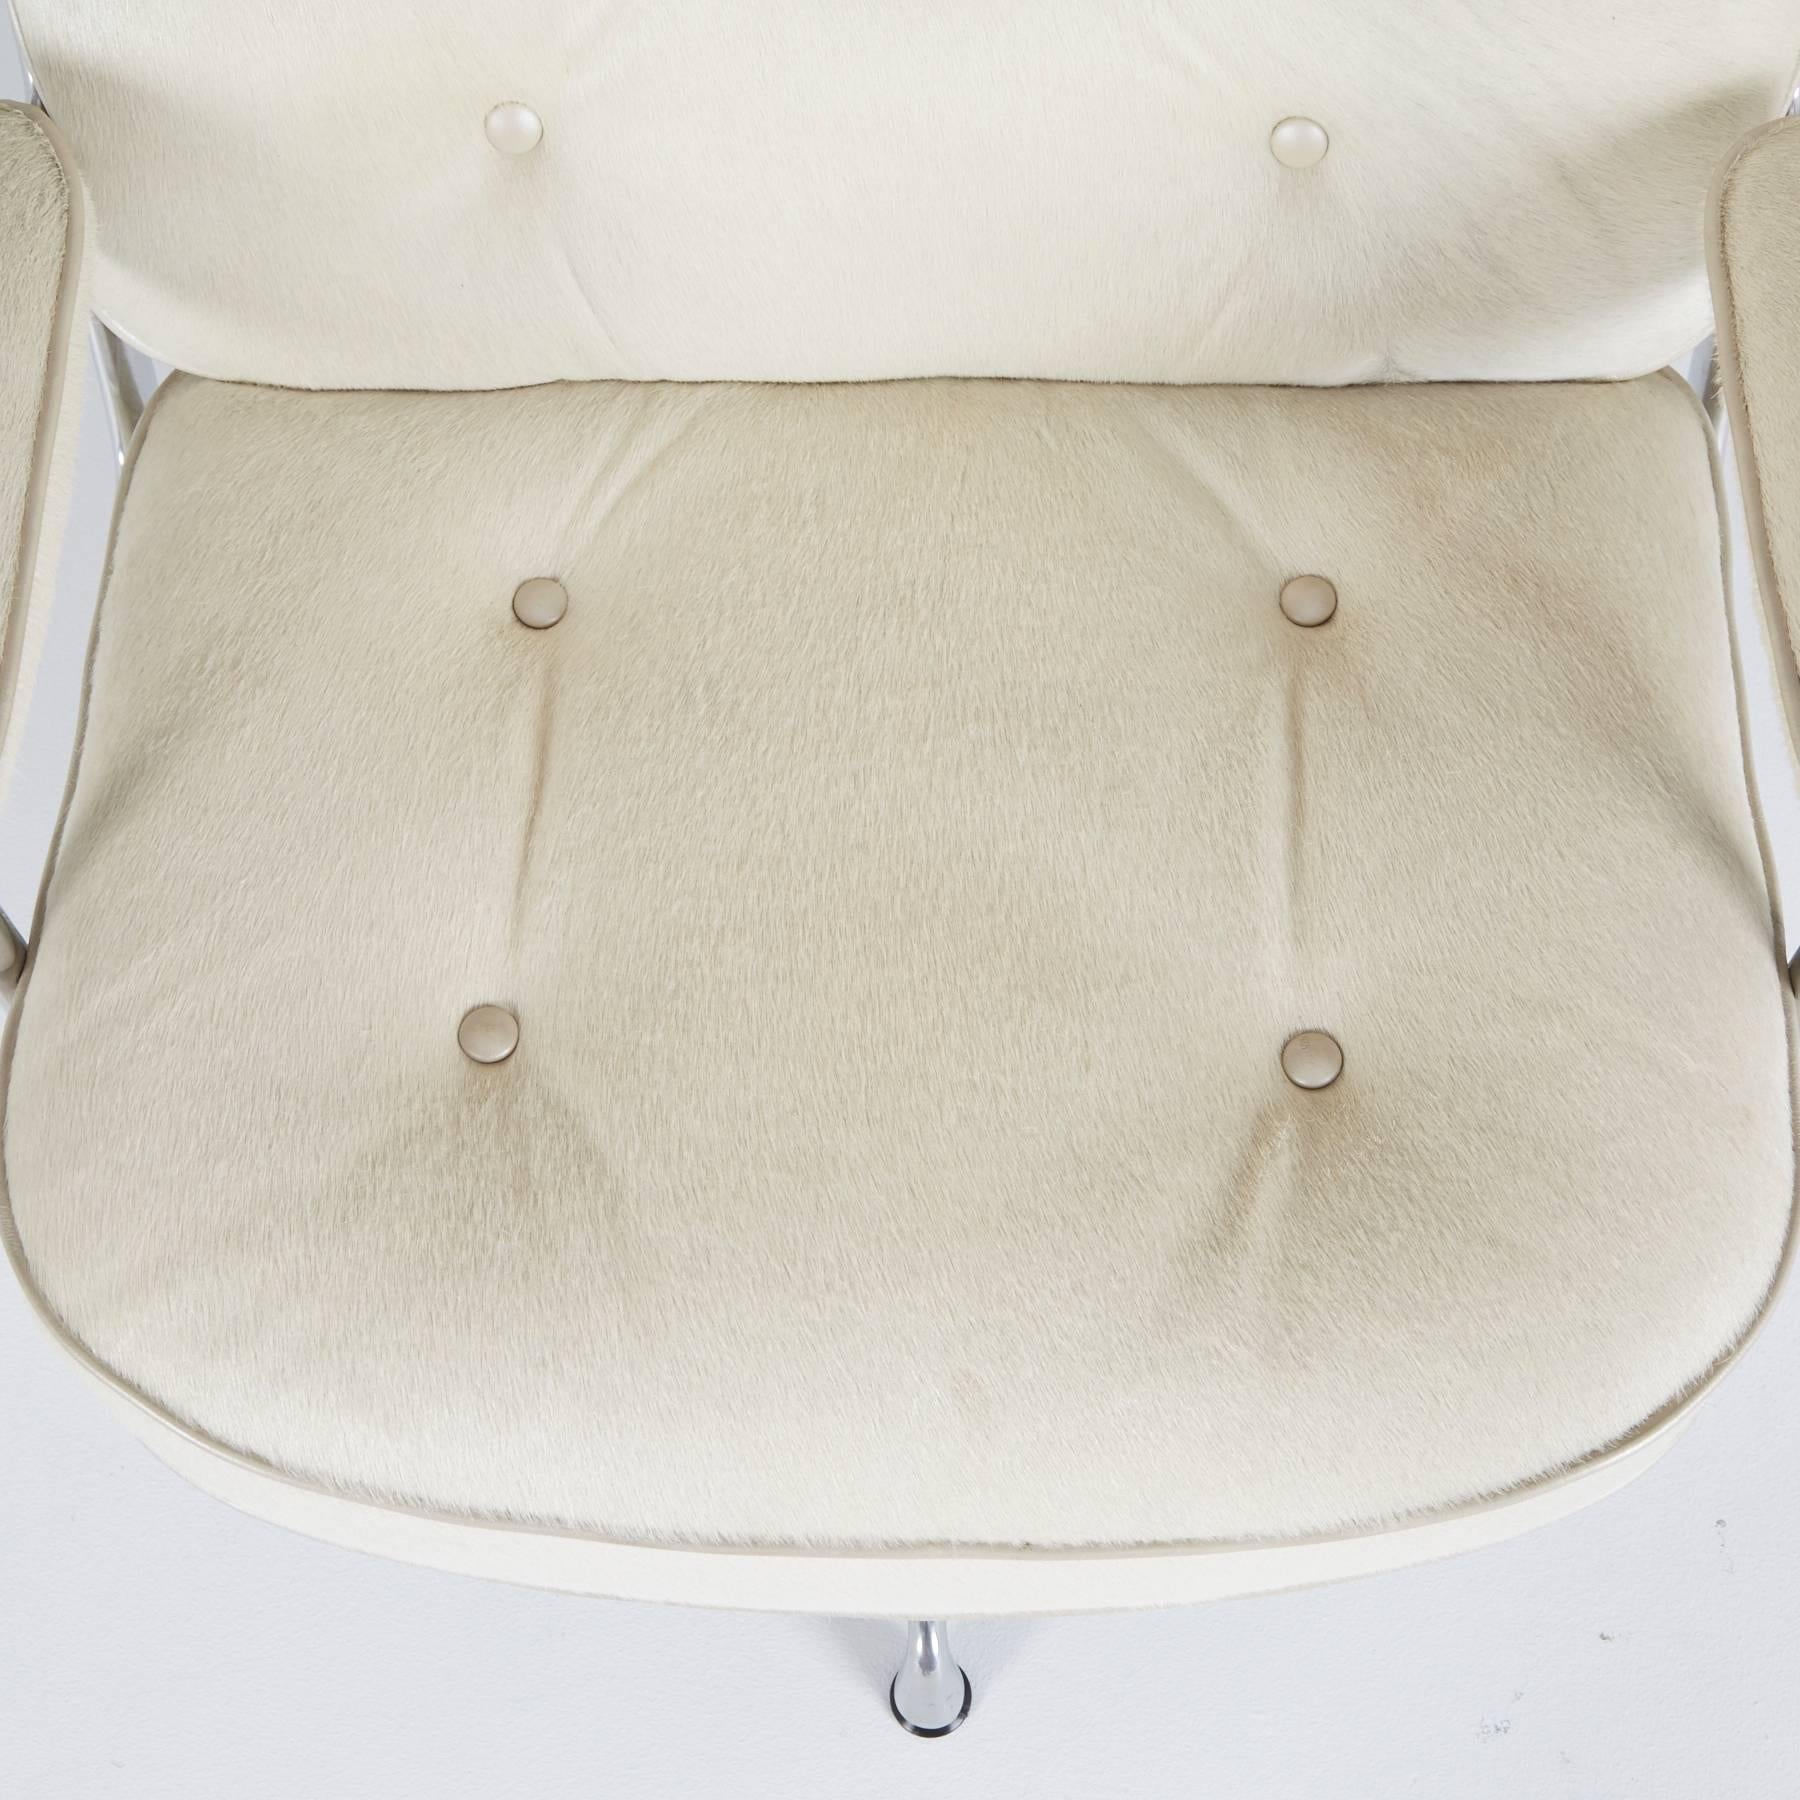 American Hair-on Hide Time Life Lobby Chairs by Eames for Herman Miller (Only 1 Left)